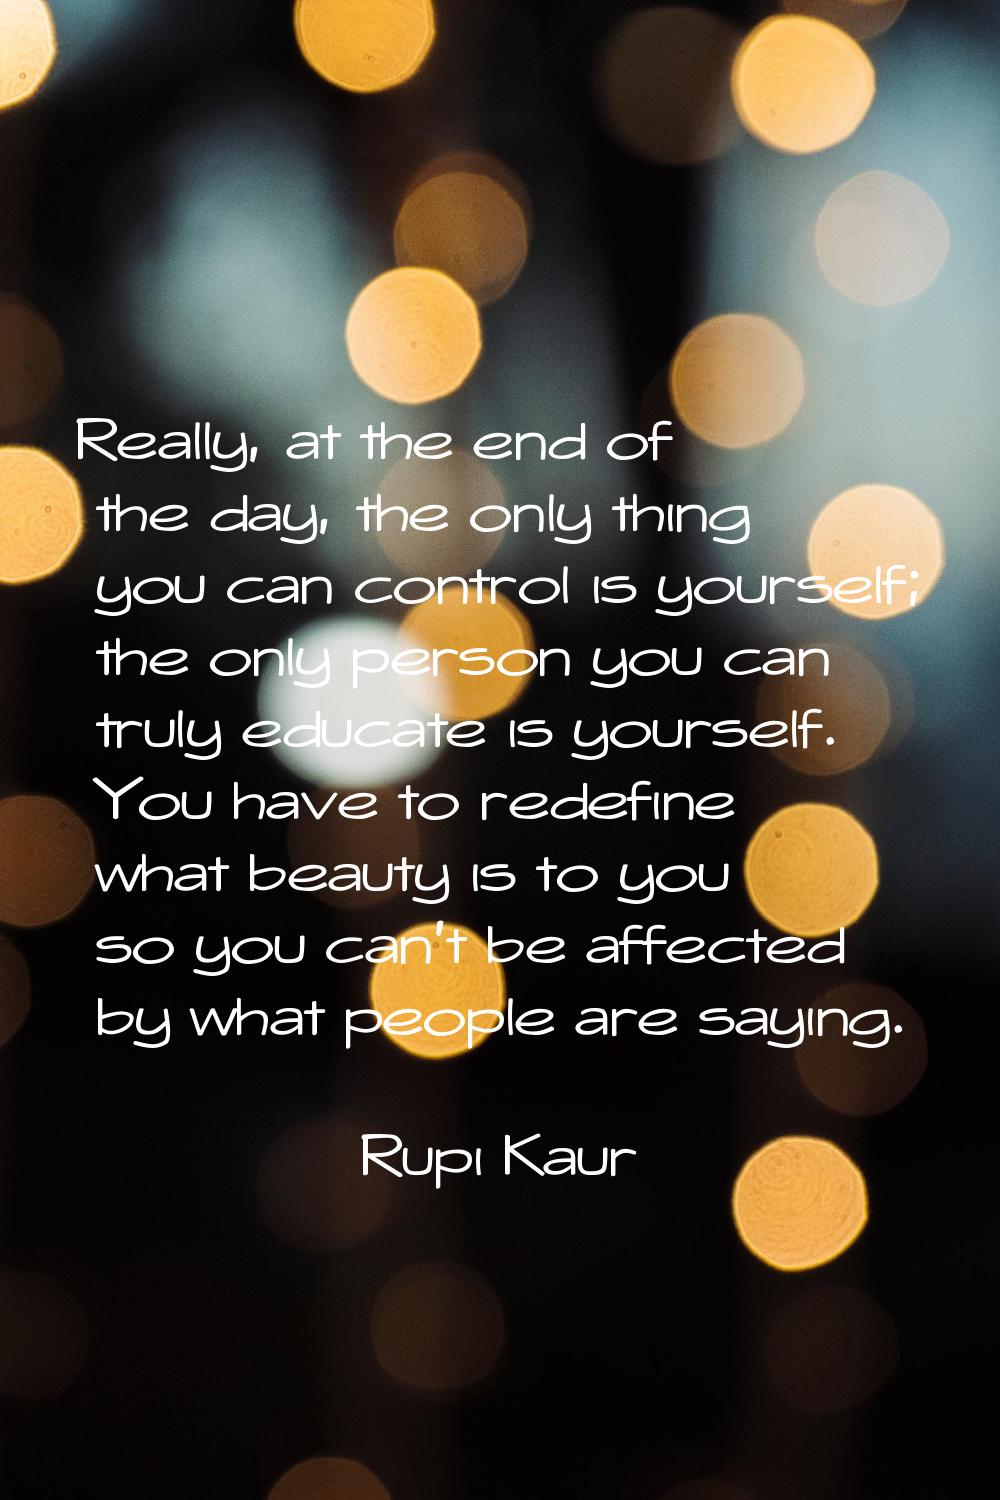 Really, at the end of the day, the only thing you can control is yourself; the only person you can 